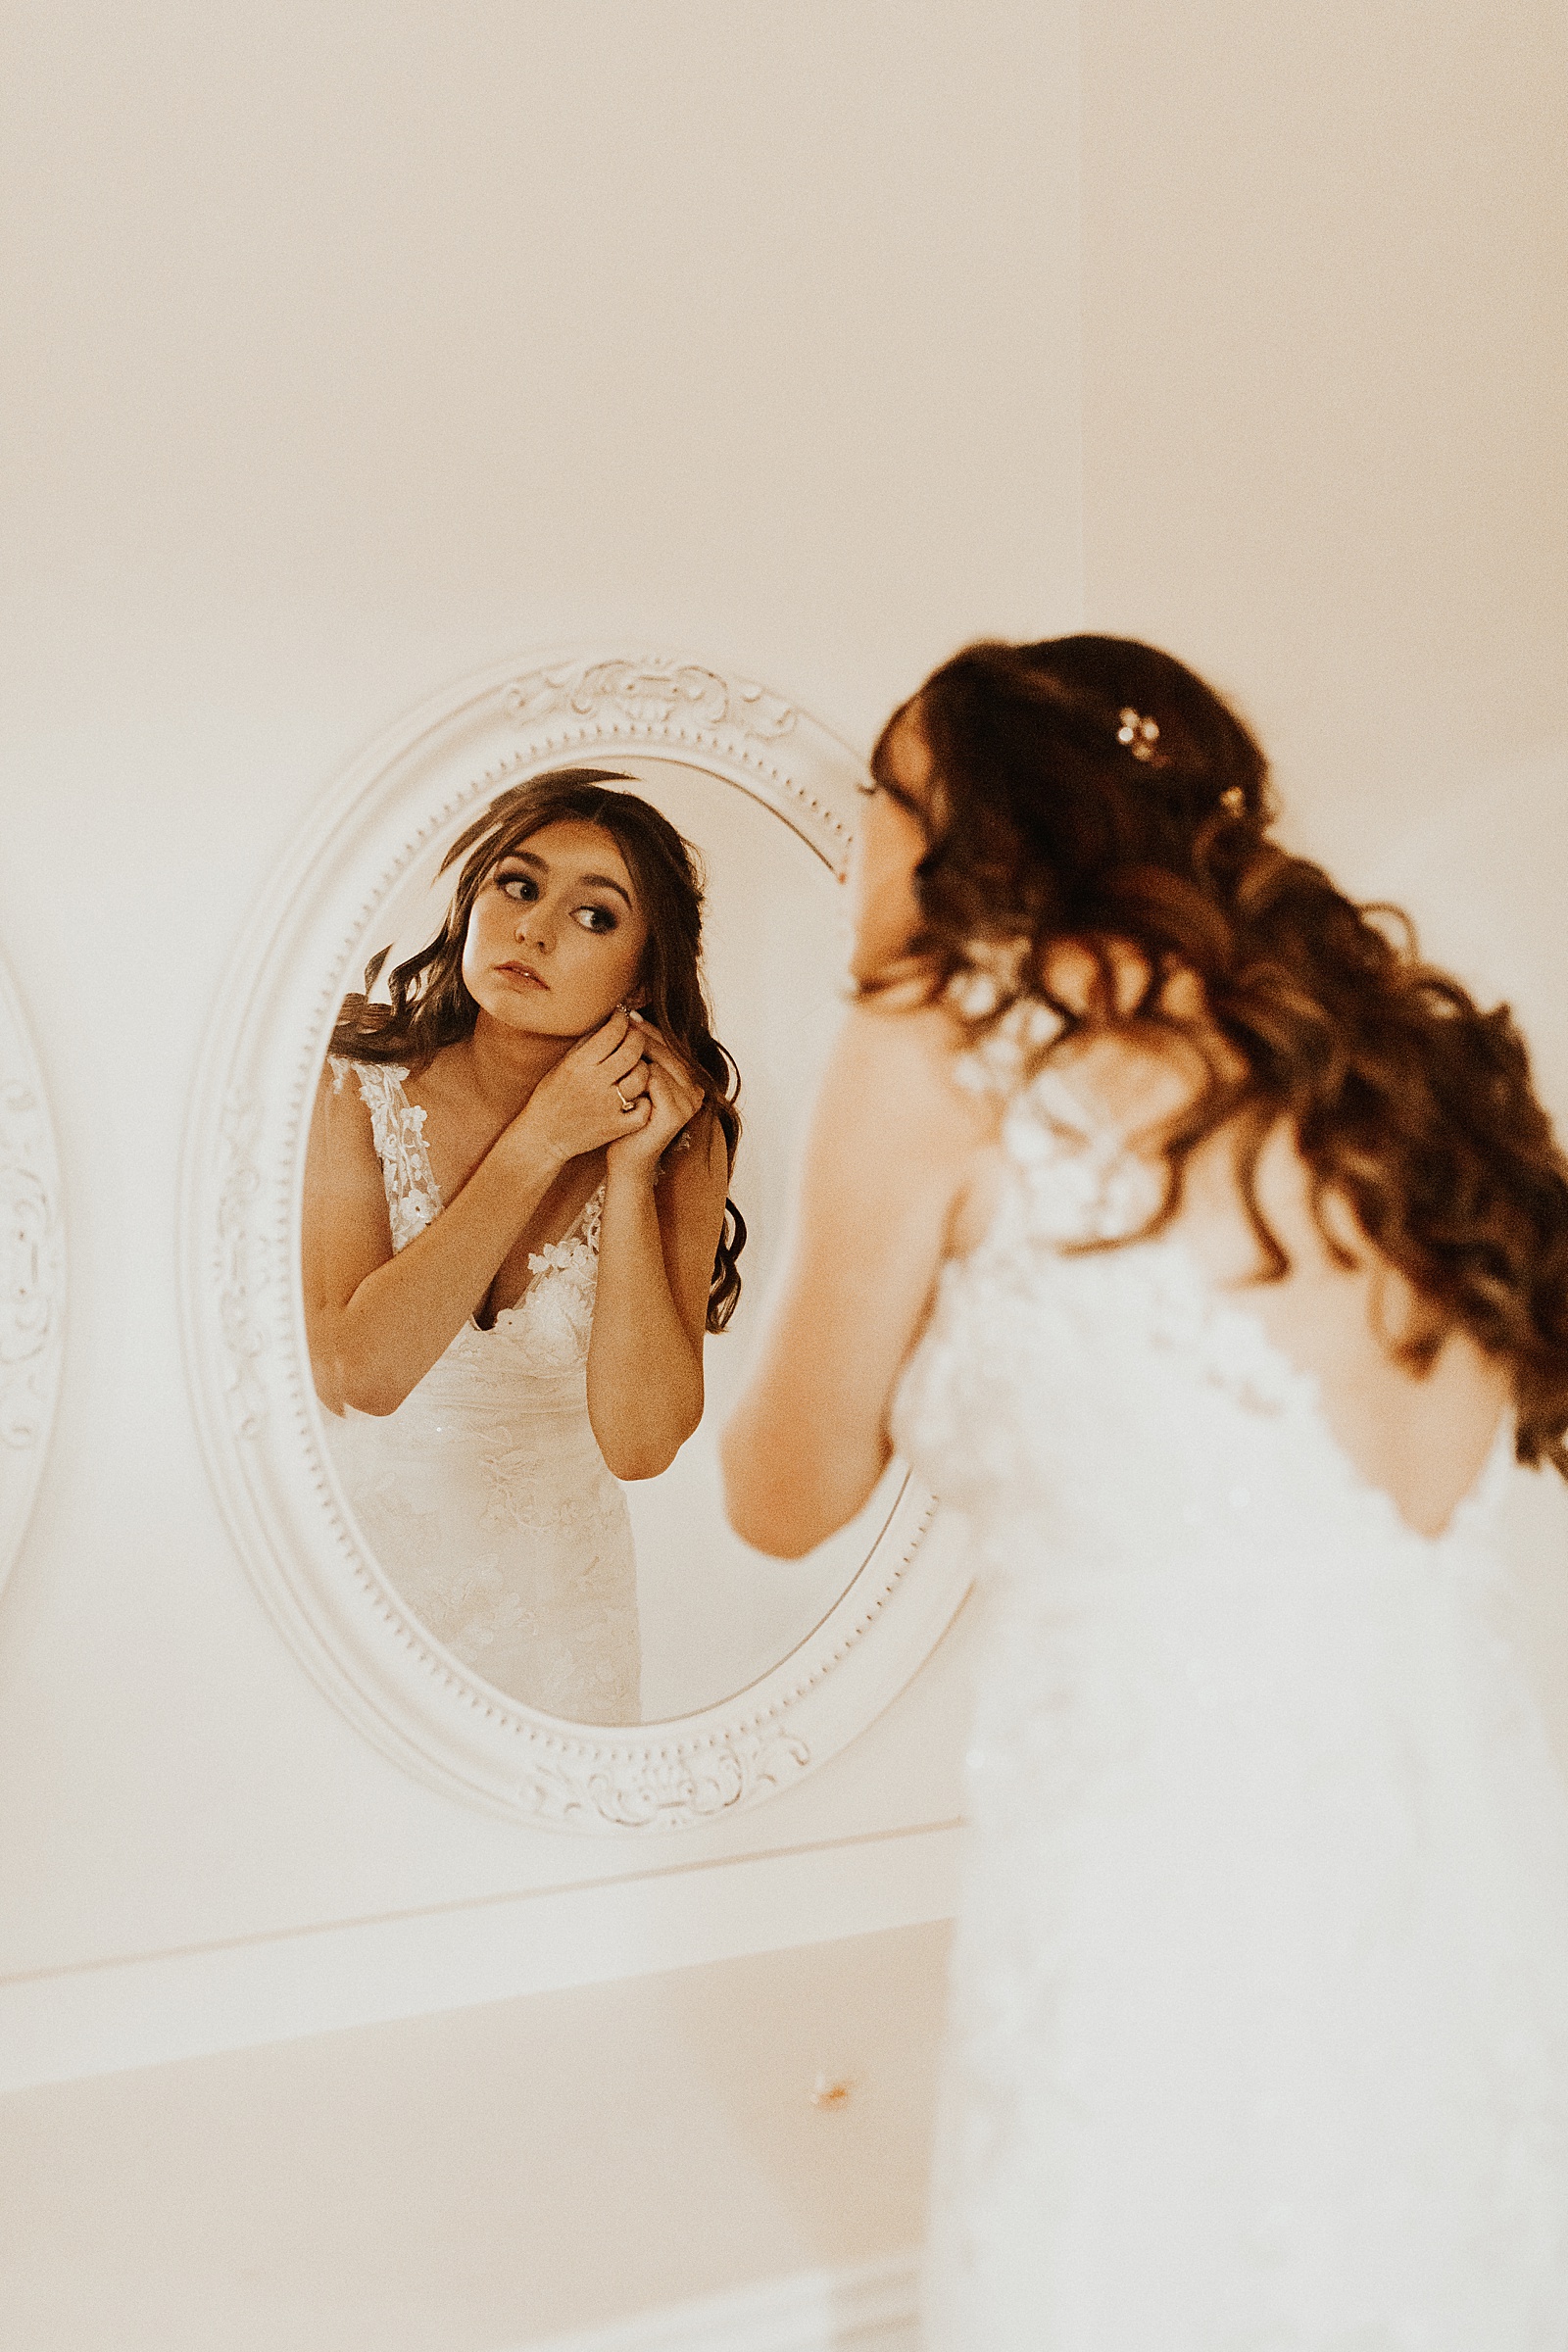 Bride getting ready at the Heritage Haus Wedding Venue in Dripping Springs, TX.